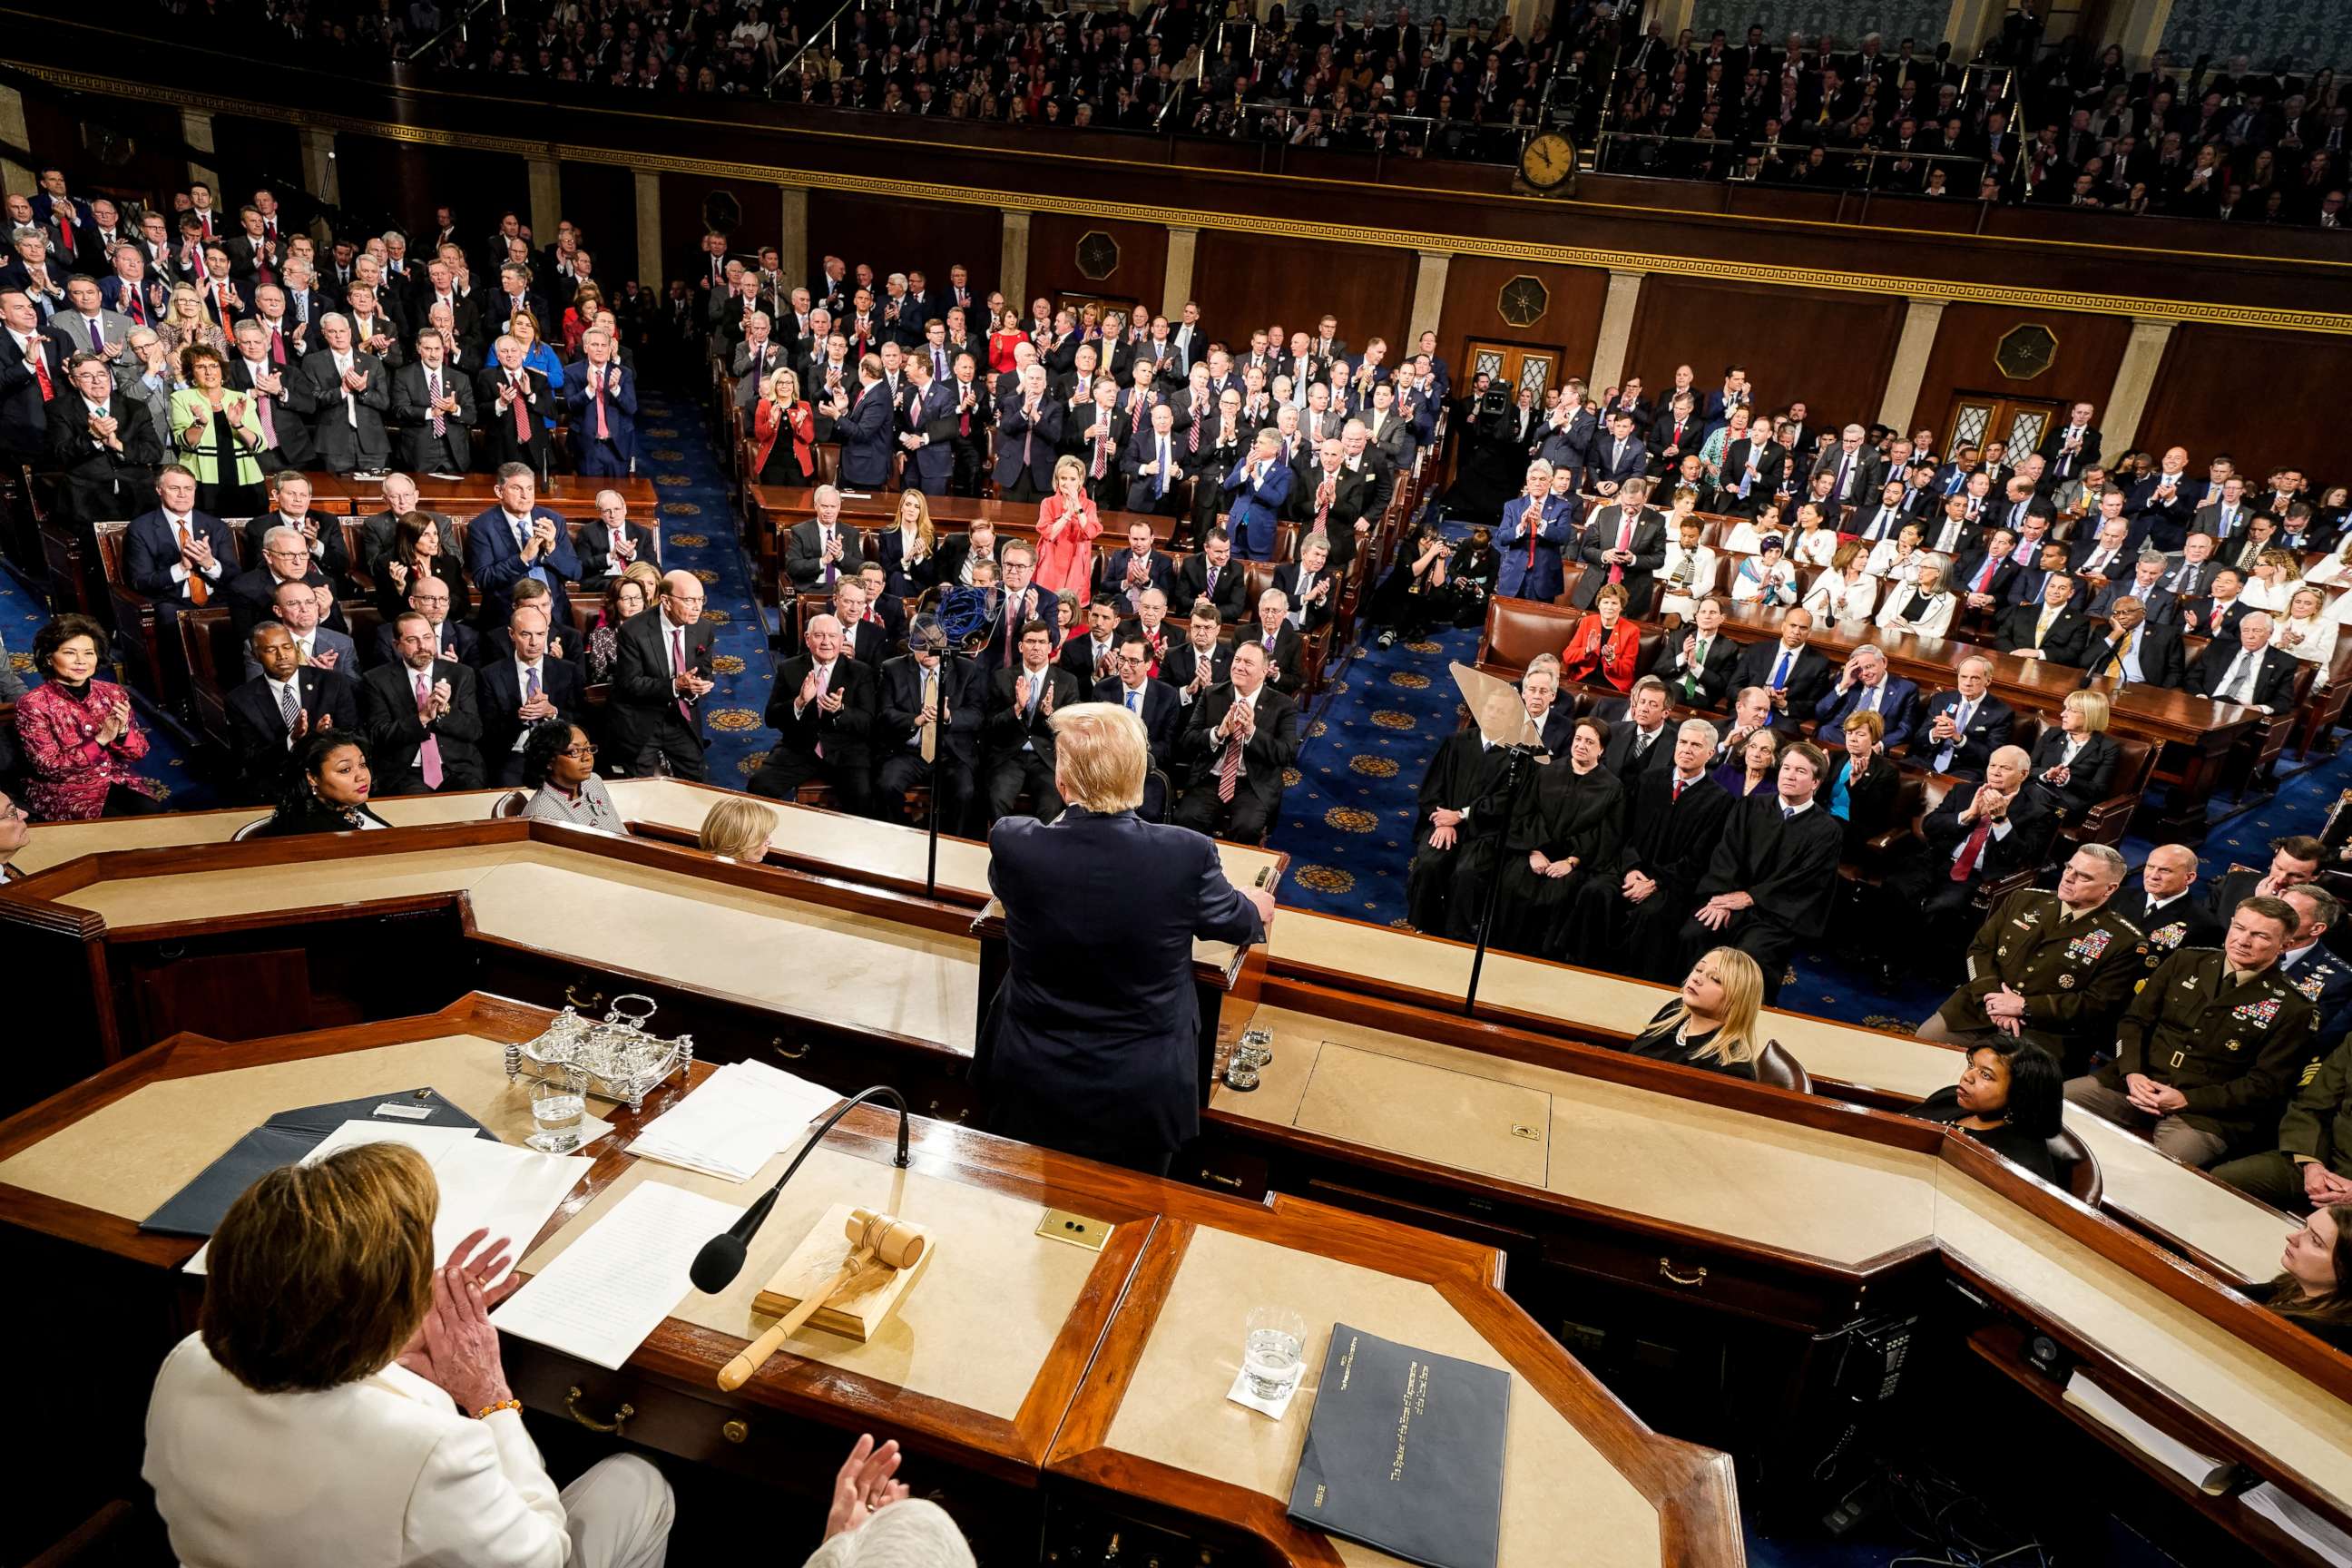 PHOTO: President Donald Trump gives the State of the Union Address in the House Chamber of the Capitol, in Washington D.C., Tuesday, Feb. 4, 2020.